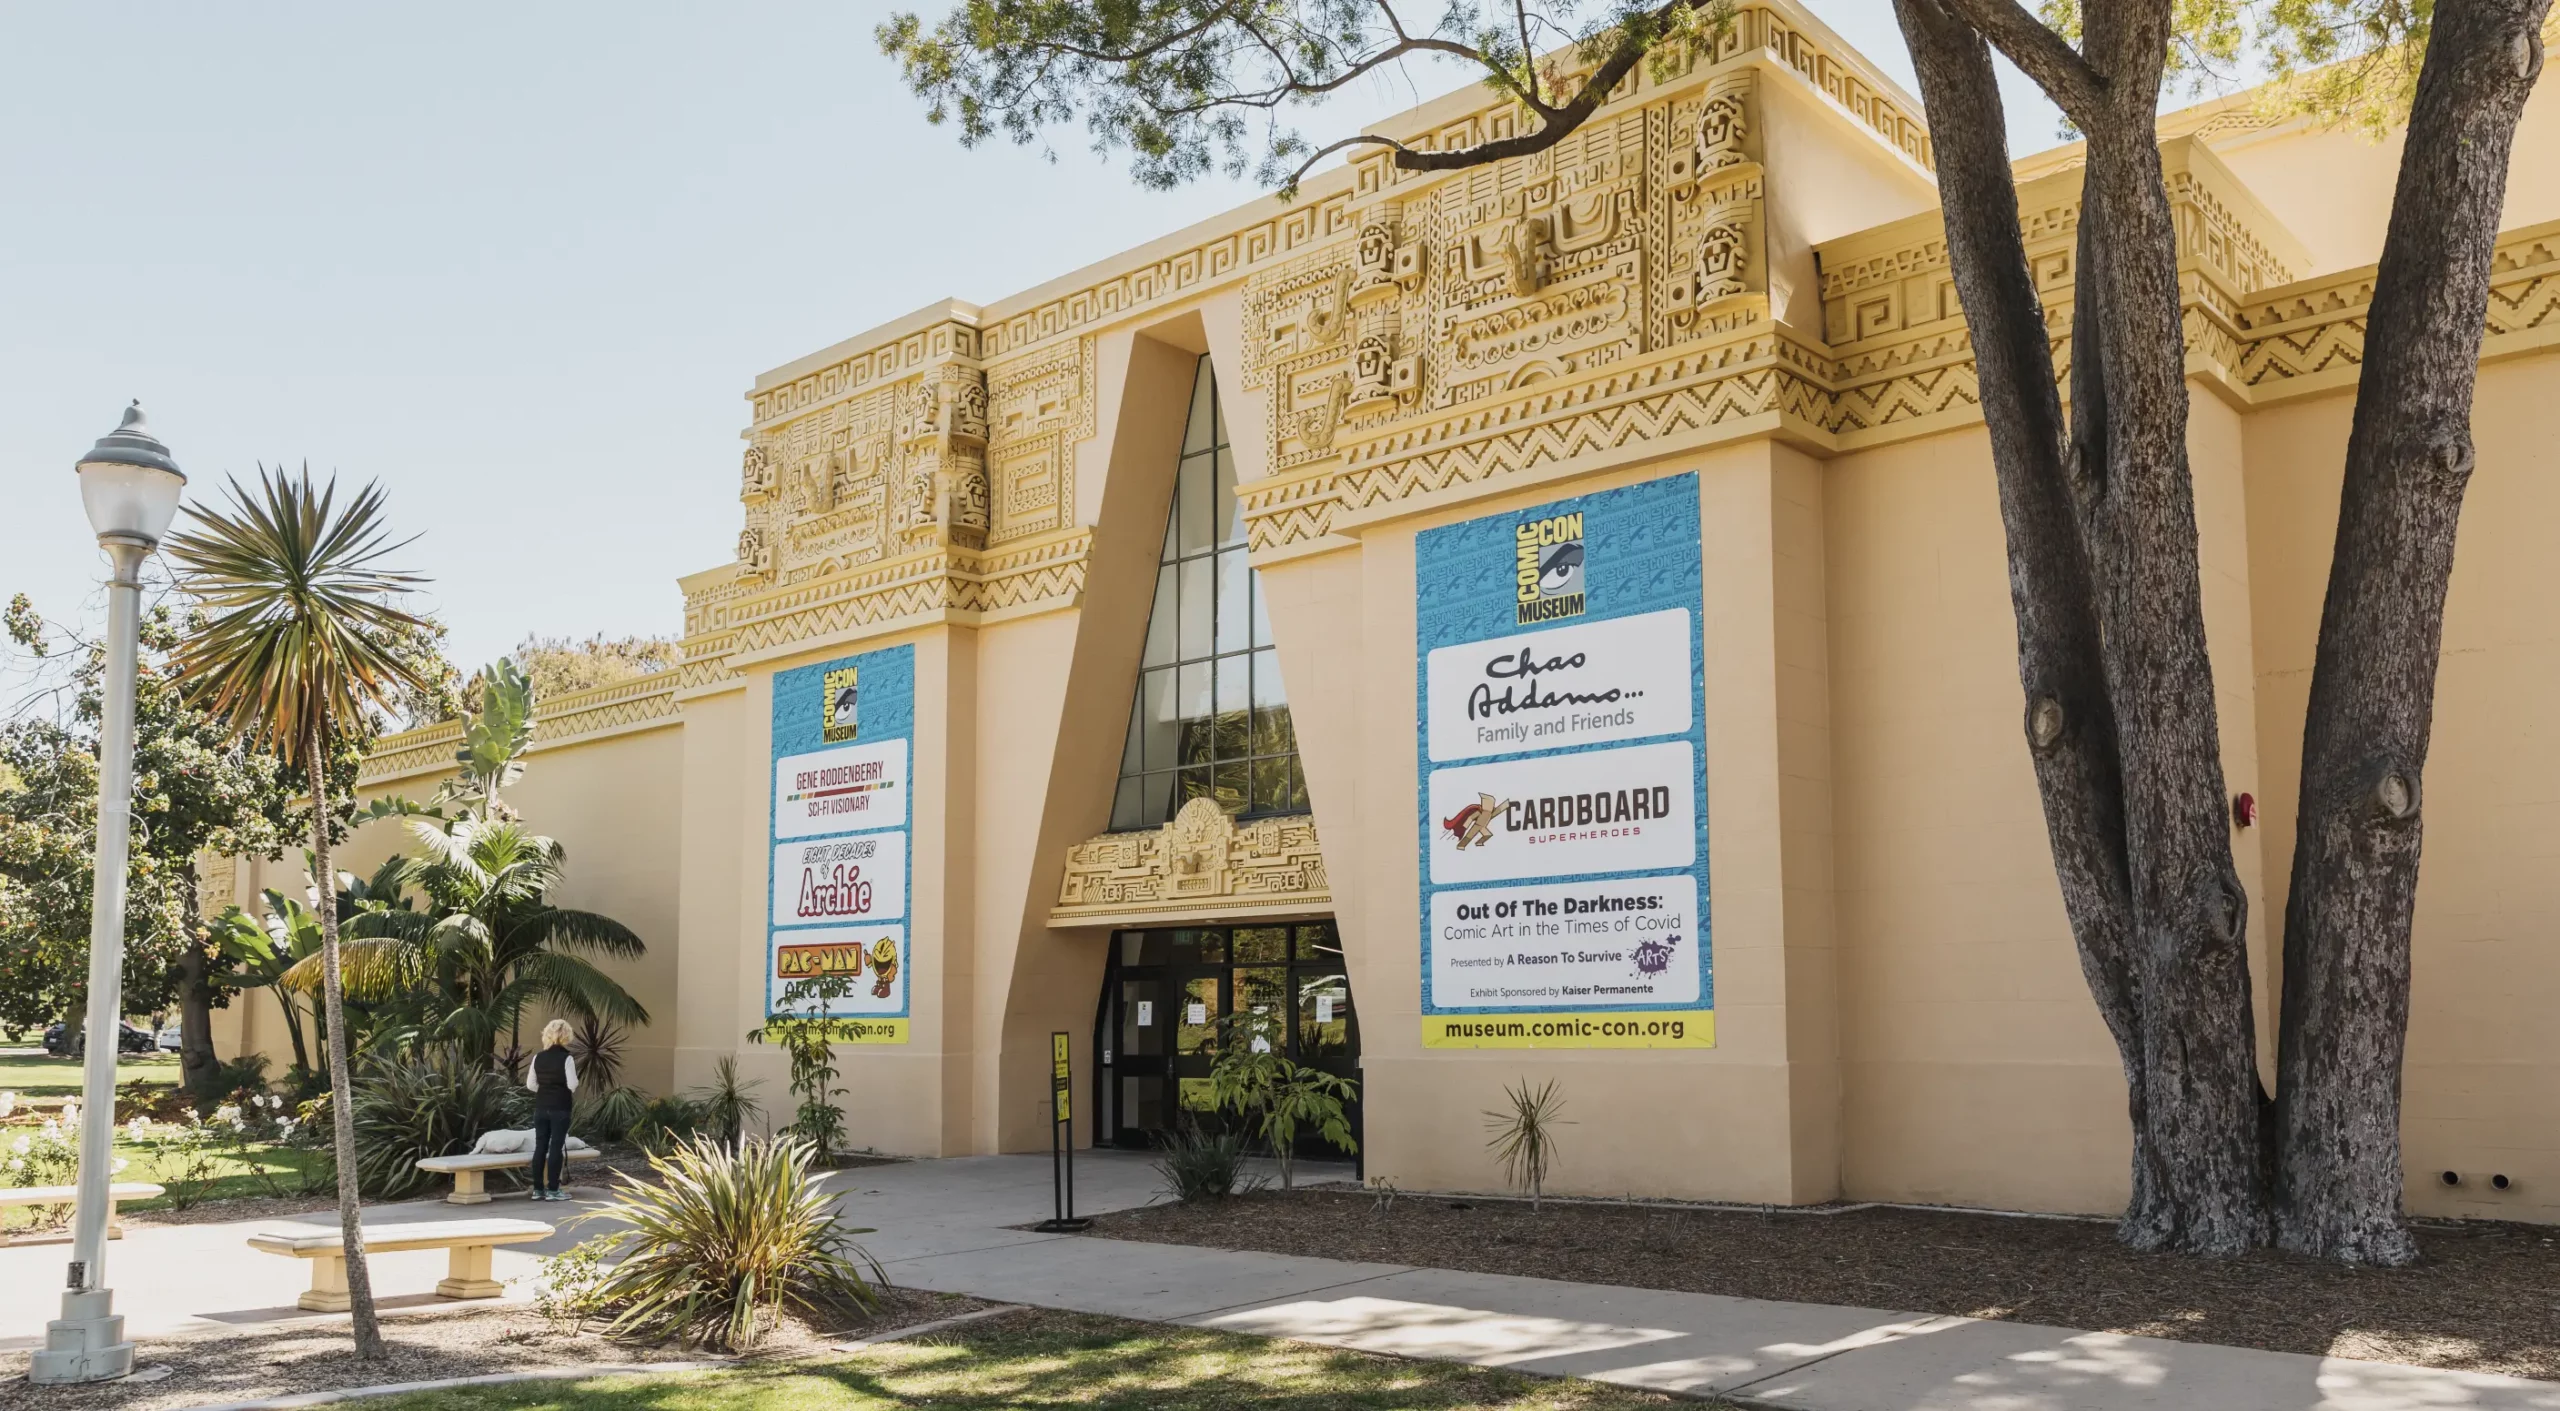 The front of the Comic-Con Museum building with archtectural detailings on the entrance that were influenced by the Palace of the Governor in Uxmal, Yucatan.